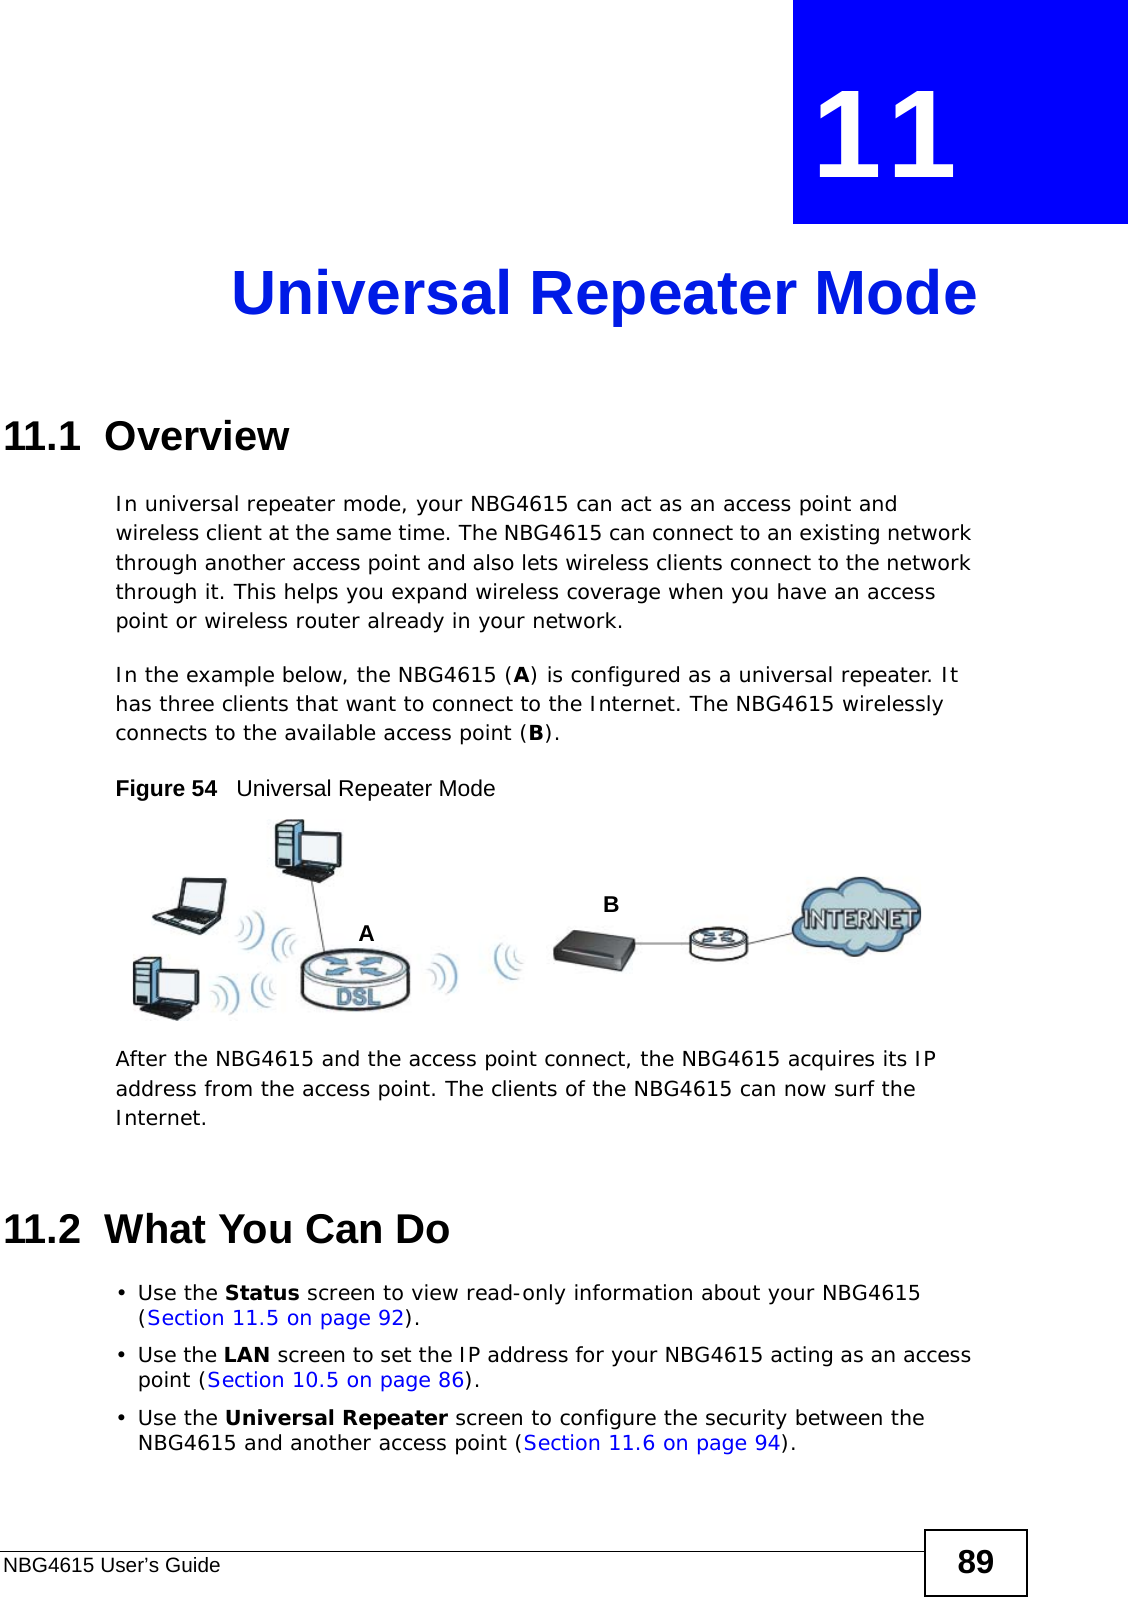 NBG4615 User’s Guide 89CHAPTER  11 Universal Repeater Mode11.1  OverviewIn universal repeater mode, your NBG4615 can act as an access point and wireless client at the same time. The NBG4615 can connect to an existing network through another access point and also lets wireless clients connect to the network through it. This helps you expand wireless coverage when you have an access point or wireless router already in your network.In the example below, the NBG4615 (A) is configured as a universal repeater. It has three clients that want to connect to the Internet. The NBG4615 wirelessly connects to the available access point (B). Figure 54   Universal Repeater ModeAfter the NBG4615 and the access point connect, the NBG4615 acquires its IP address from the access point. The clients of the NBG4615 can now surf the Internet. 11.2  What You Can Do•Use the Status screen to view read-only information about your NBG4615 (Section 11.5 on page 92).•Use the LAN screen to set the IP address for your NBG4615 acting as an access point (Section 10.5 on page 86).•Use the Universal Repeater screen to configure the security between the NBG4615 and another access point (Section 11.6 on page 94).AB